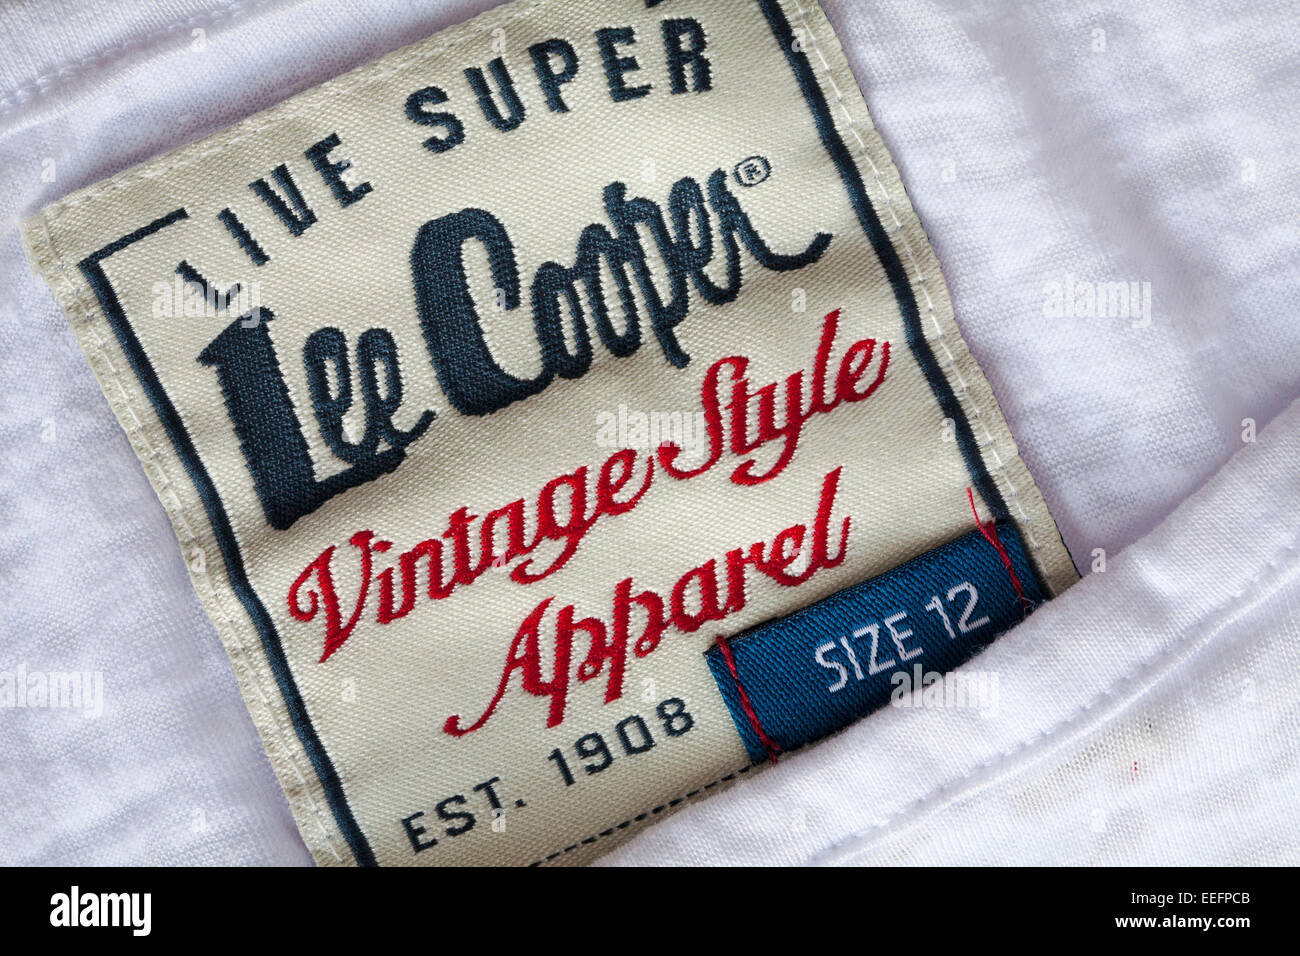 Live Super Lee Cooper Vintage Style Apparel Est 1908 label in Size 12  woman's white jeans Stock Photo - Alamy